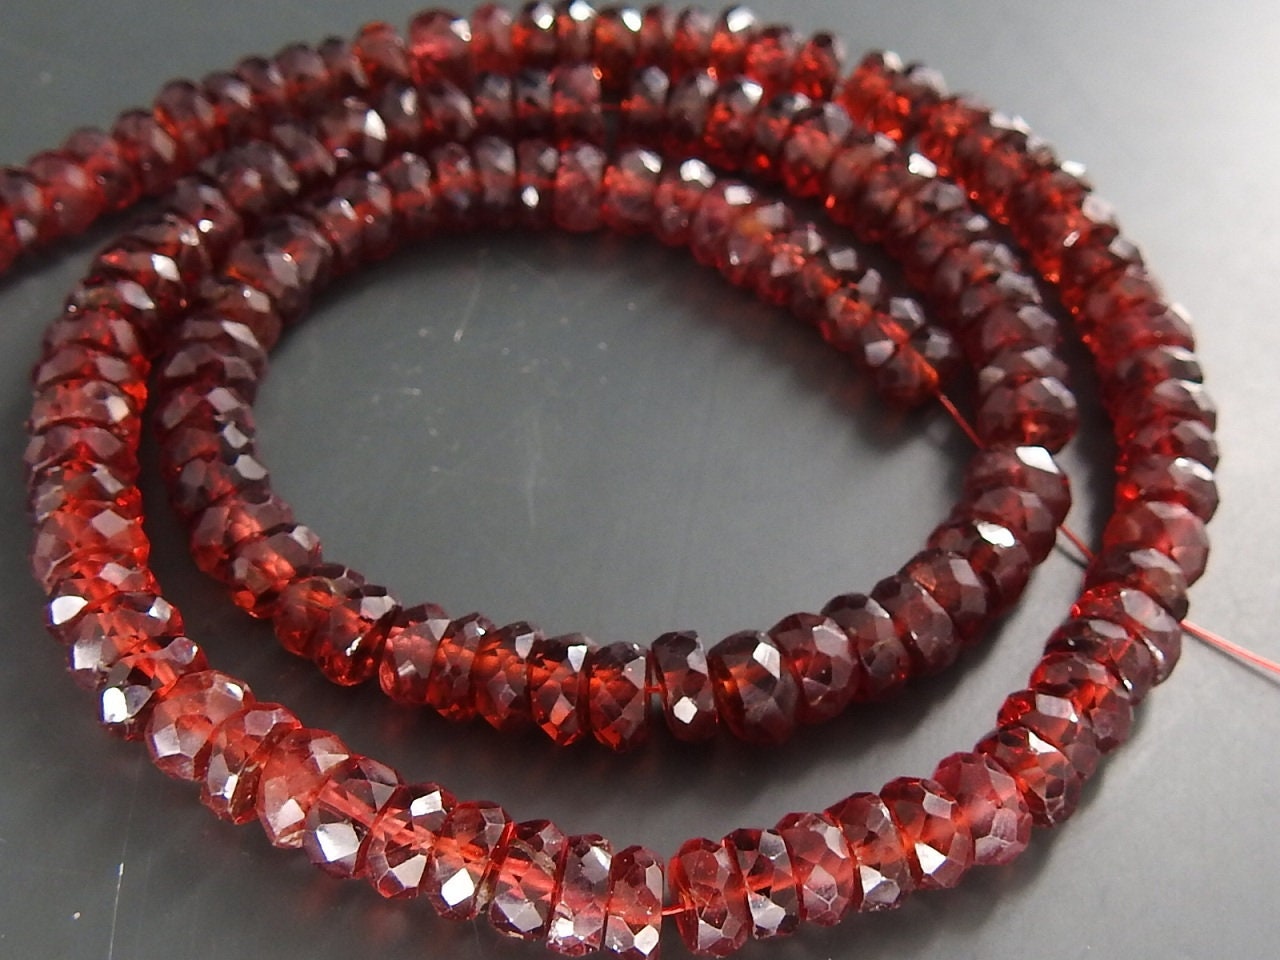 Mozambique Garnet Faceted Roundel Beads,Handmade,Loose Stone,Necklace,For Making Jewelry,16Inch Strand,Wholesaler,Supplies,100%NaturalBB(B6) | Save 33% - Rajasthan Living 20